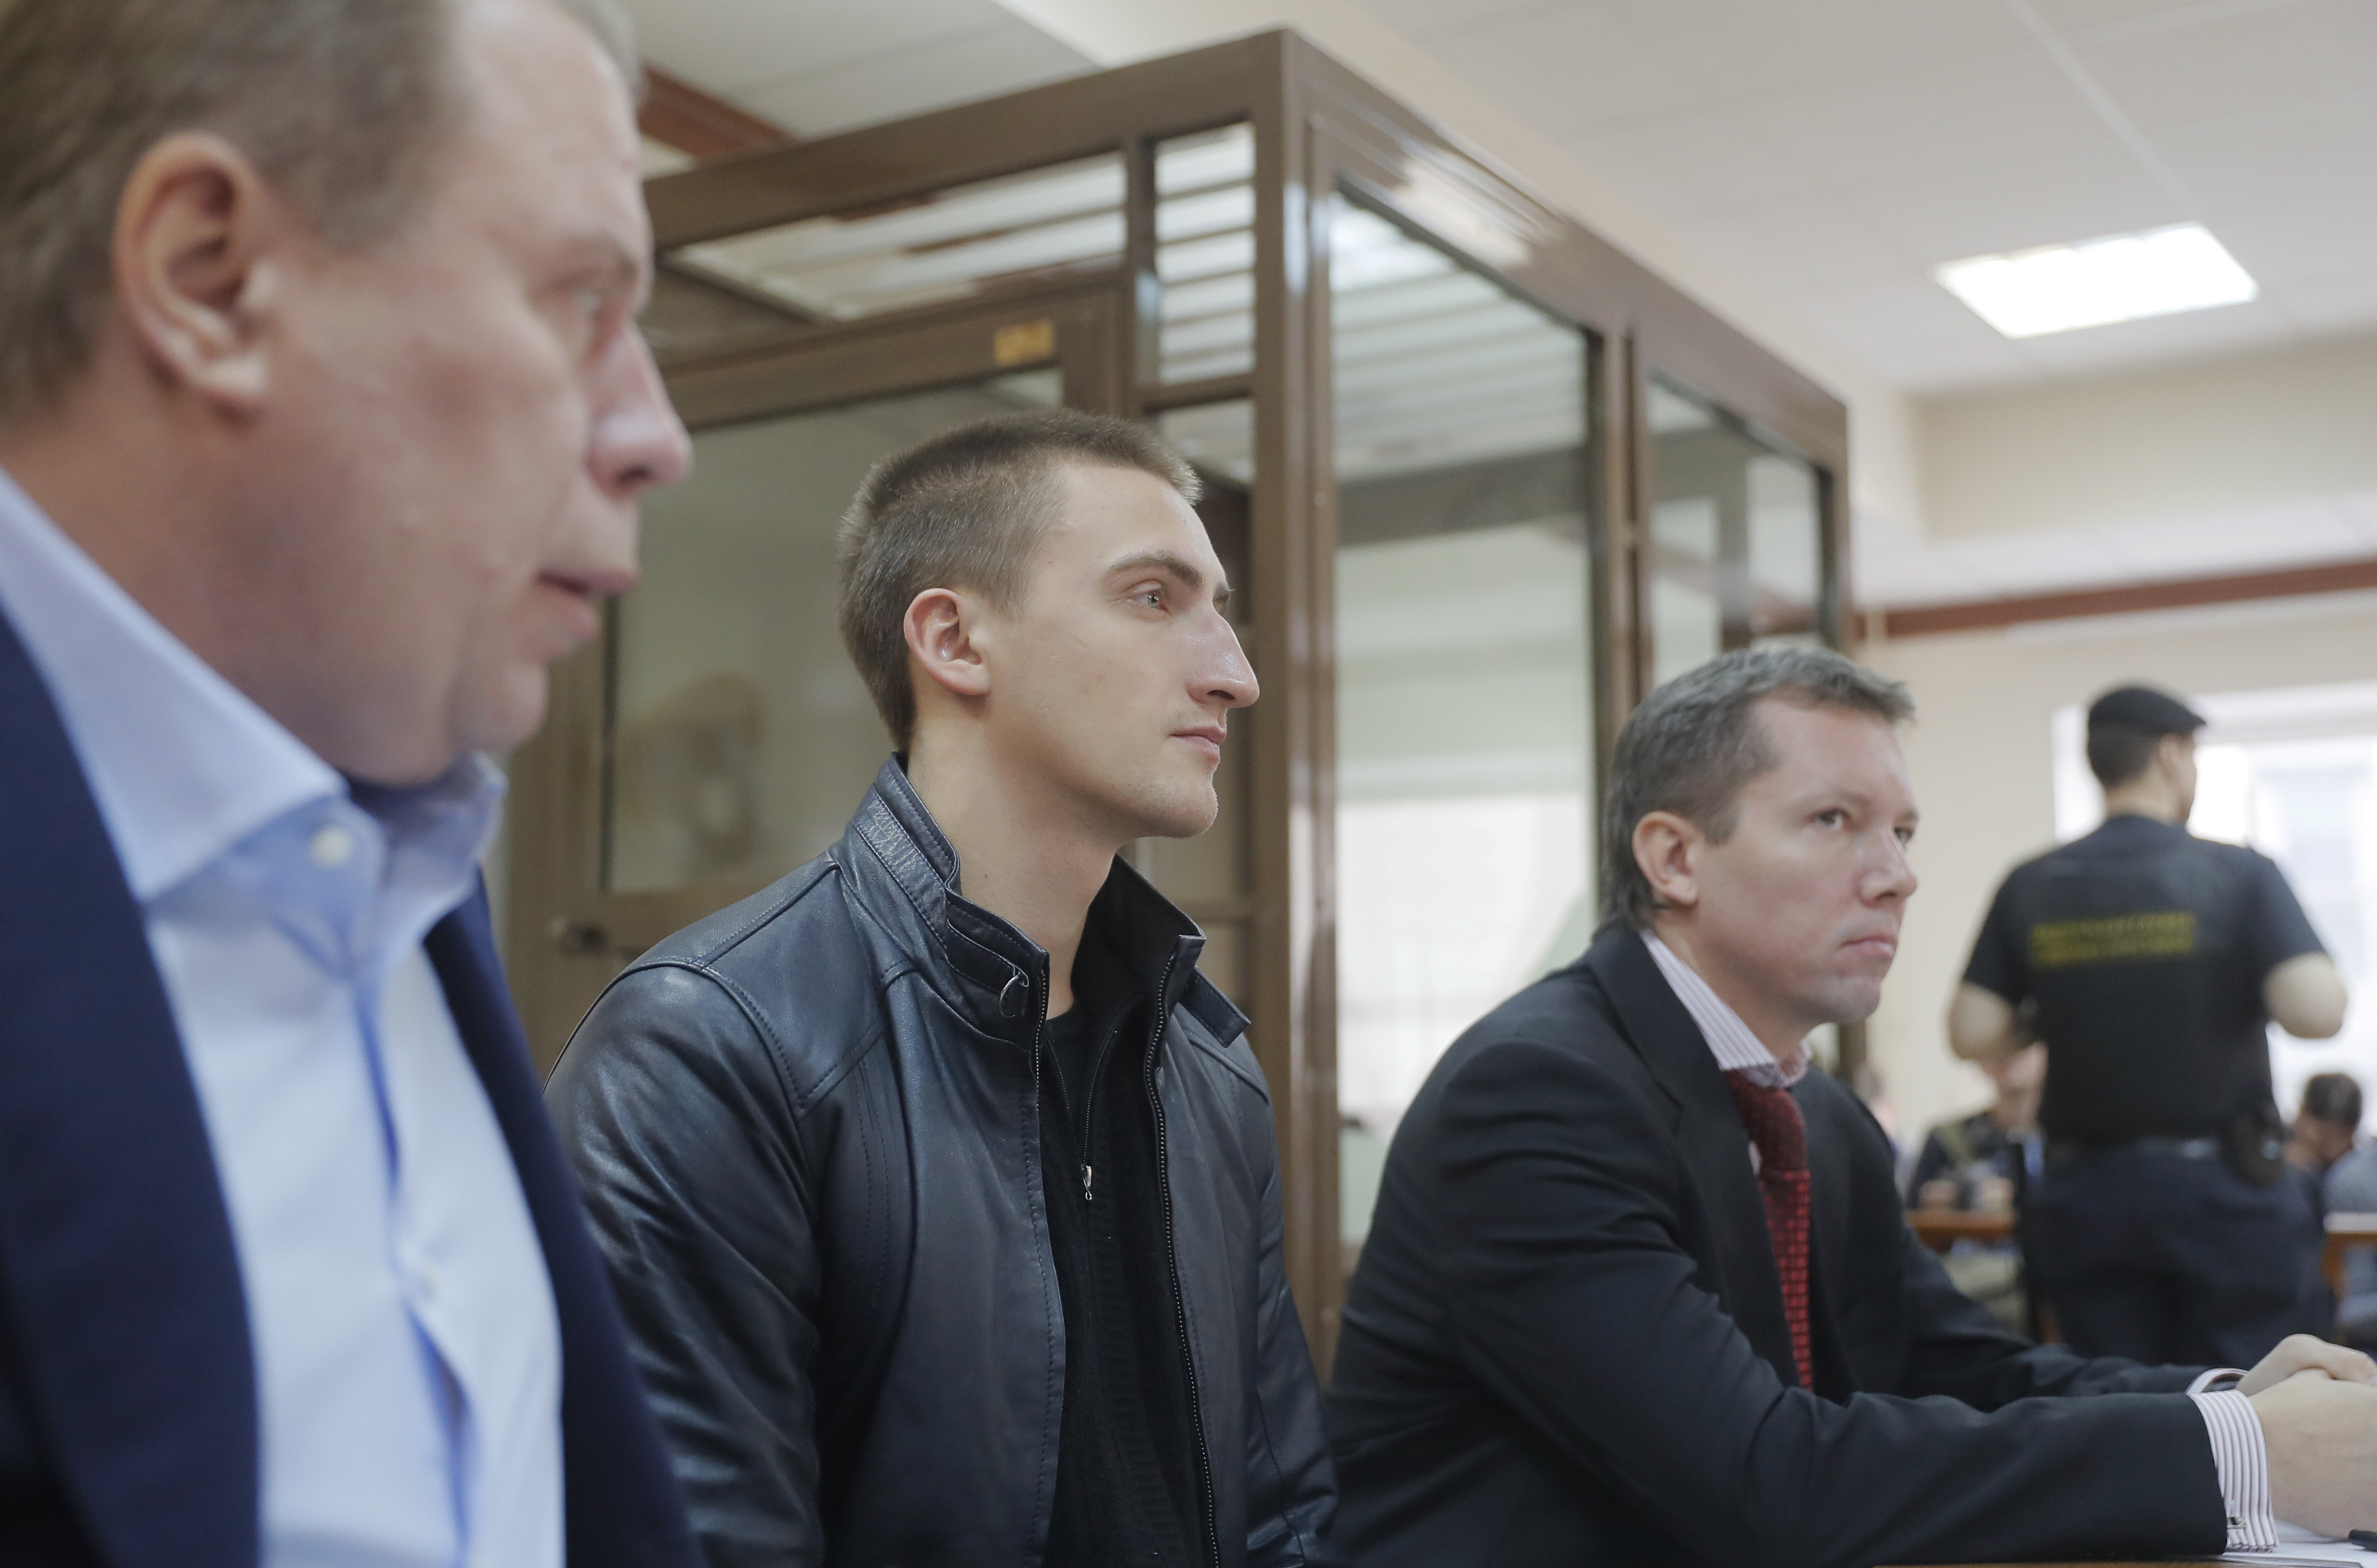 epa07870128 Russian actor Pavel Ustinov (C), sentenced to 3.5 years of penal colony for his resistance to police during a protest action, and loyer Pavel Kucherena (L) attend a session of Moscow City Court, in Moscow, Russia, in Moscow, Russia, 26 September 2019. The Moscow's Tverskoy district Court sentenced actor Pavel Ustinov to three and a half years in a penal colony after his arrest during an opposition rally in Moscow on 03 August. Mass protests of his colleagues, teachers, priests and other people caused by obviously unfair penalty demand to review his case and to cancel sentence. One week ago Moscow City Court has considered the appeal for the release of actor Pavel Ustinov from the pre-trial detention centre and ruled to free him under the pledge not to leave the country. Today the court verifies the validity of the sentence imposed on actor Pavel Ustinov.  EPA/SERGEI ILNITSKY